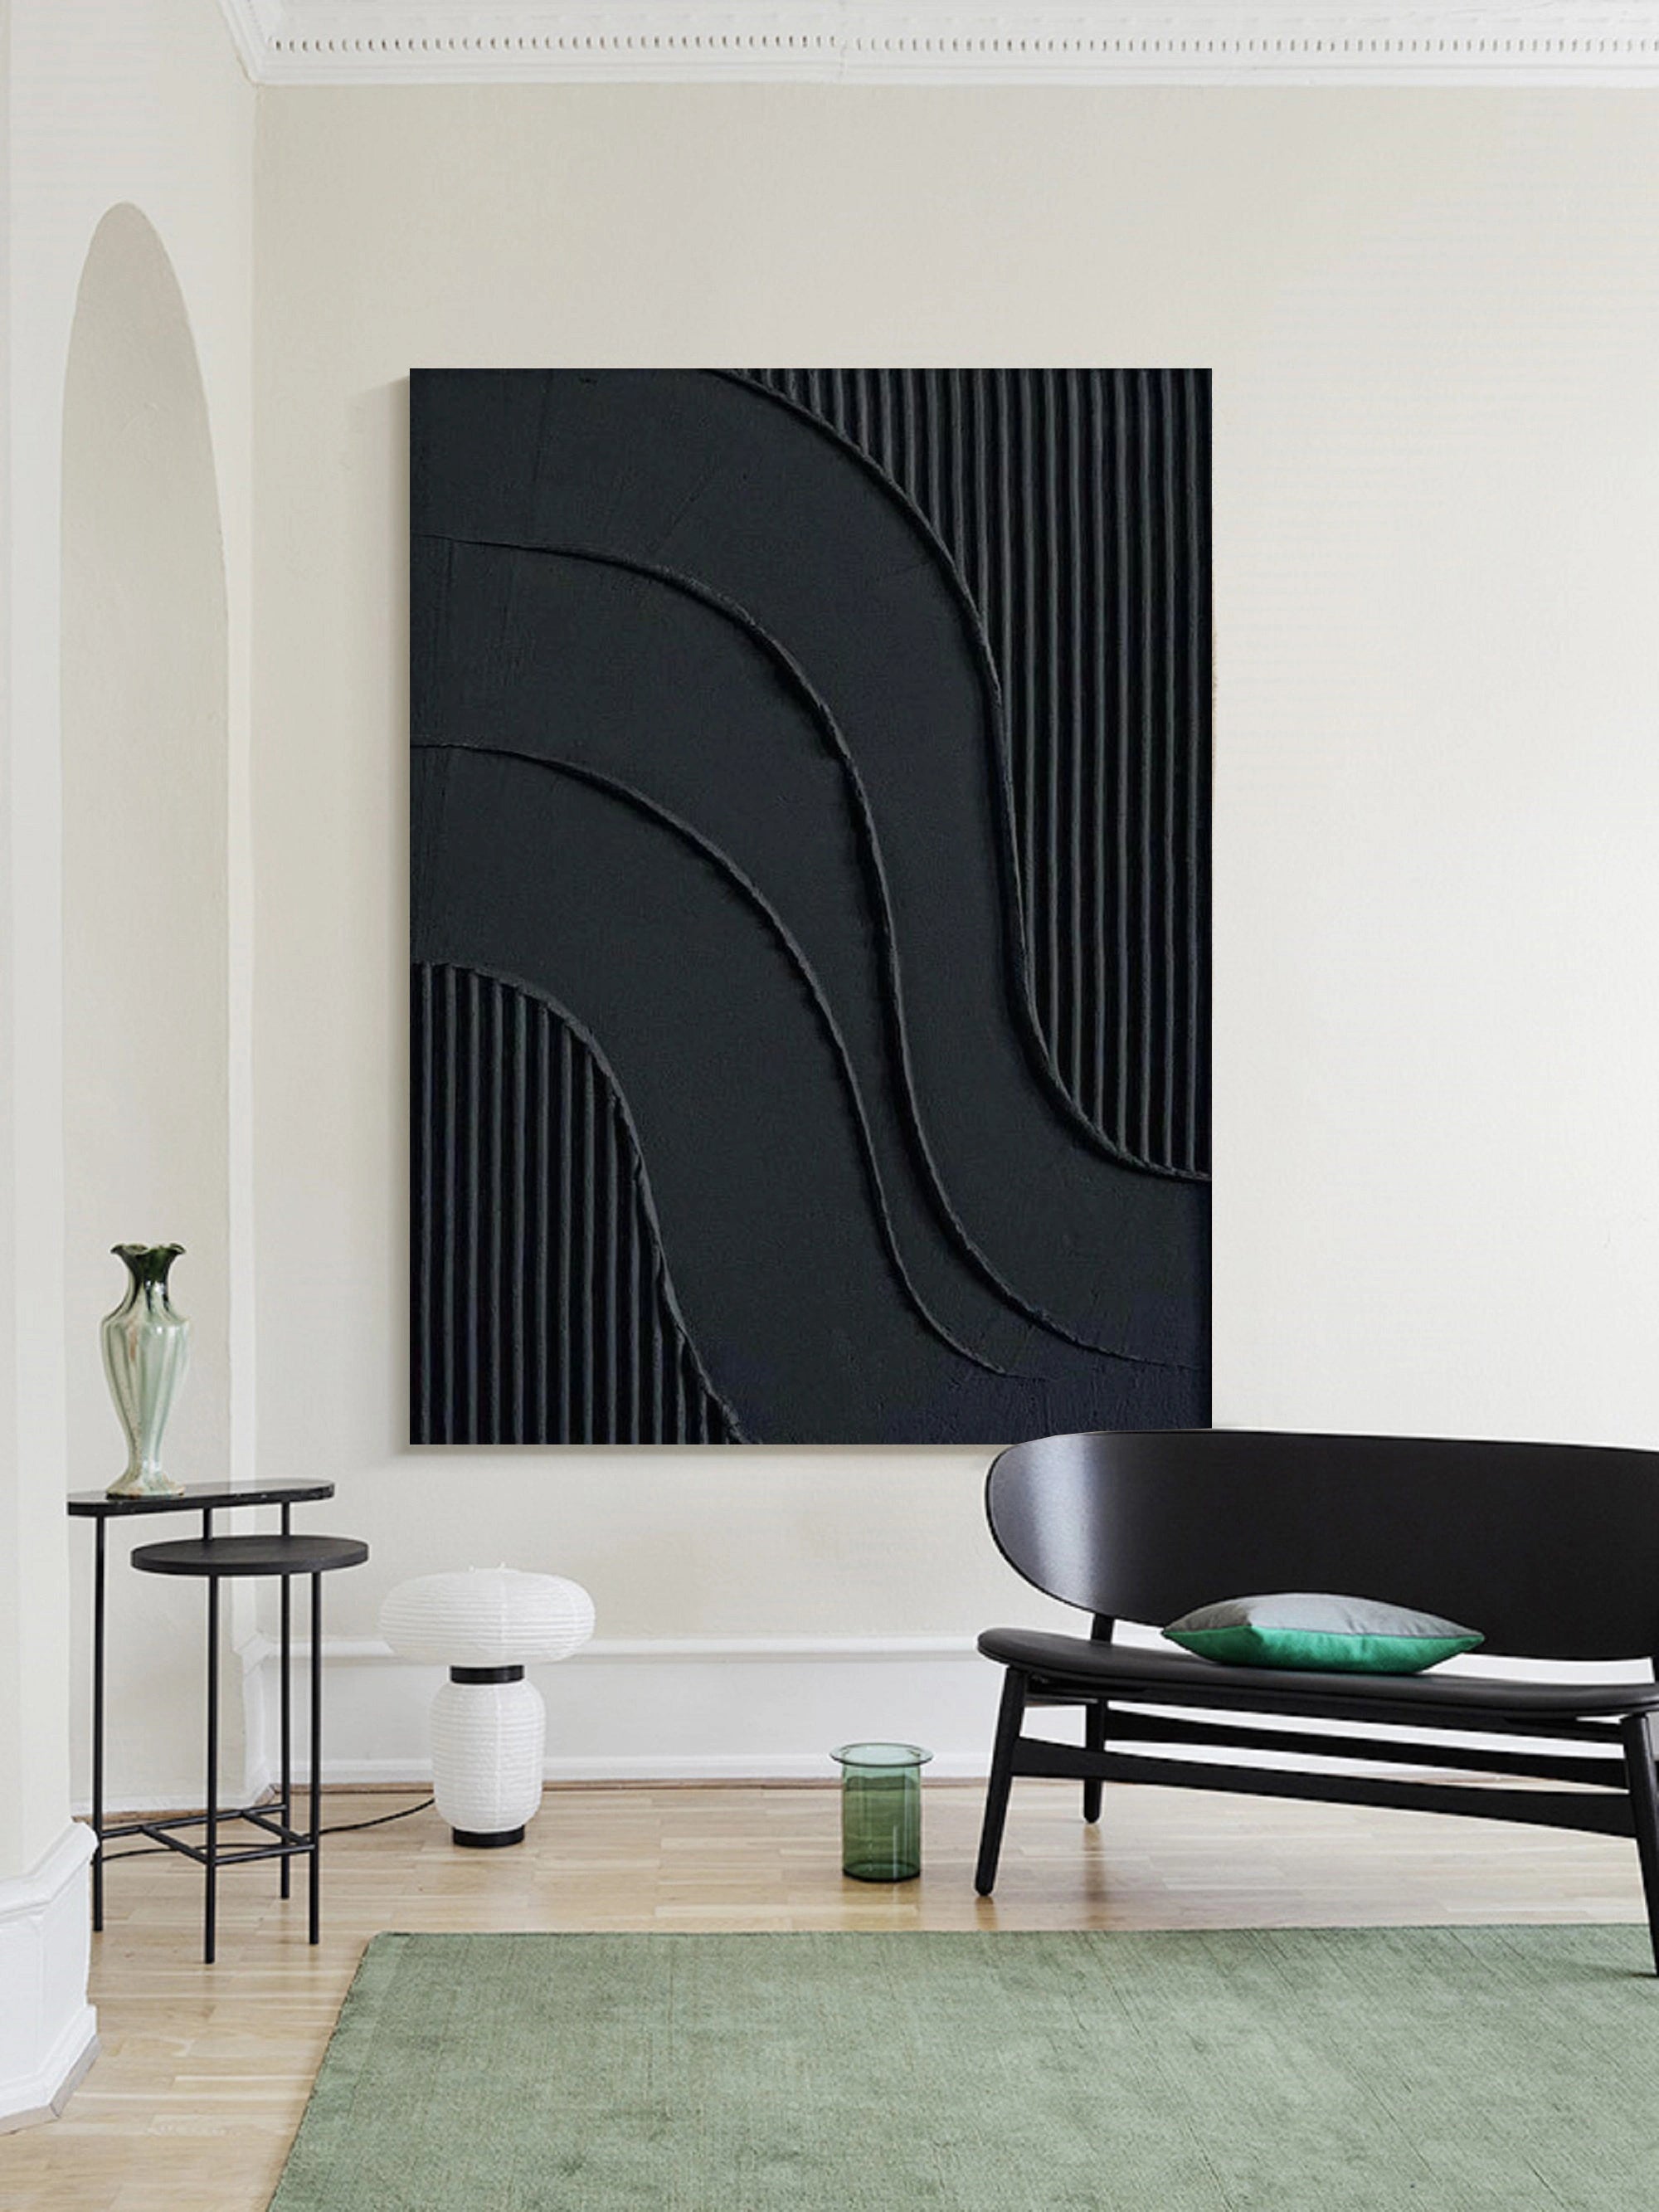 Black 3D Textured Minimalist Original Handcrafted Painting On Canvas Large Abstract Wall Art Luxury Modern Home Decor